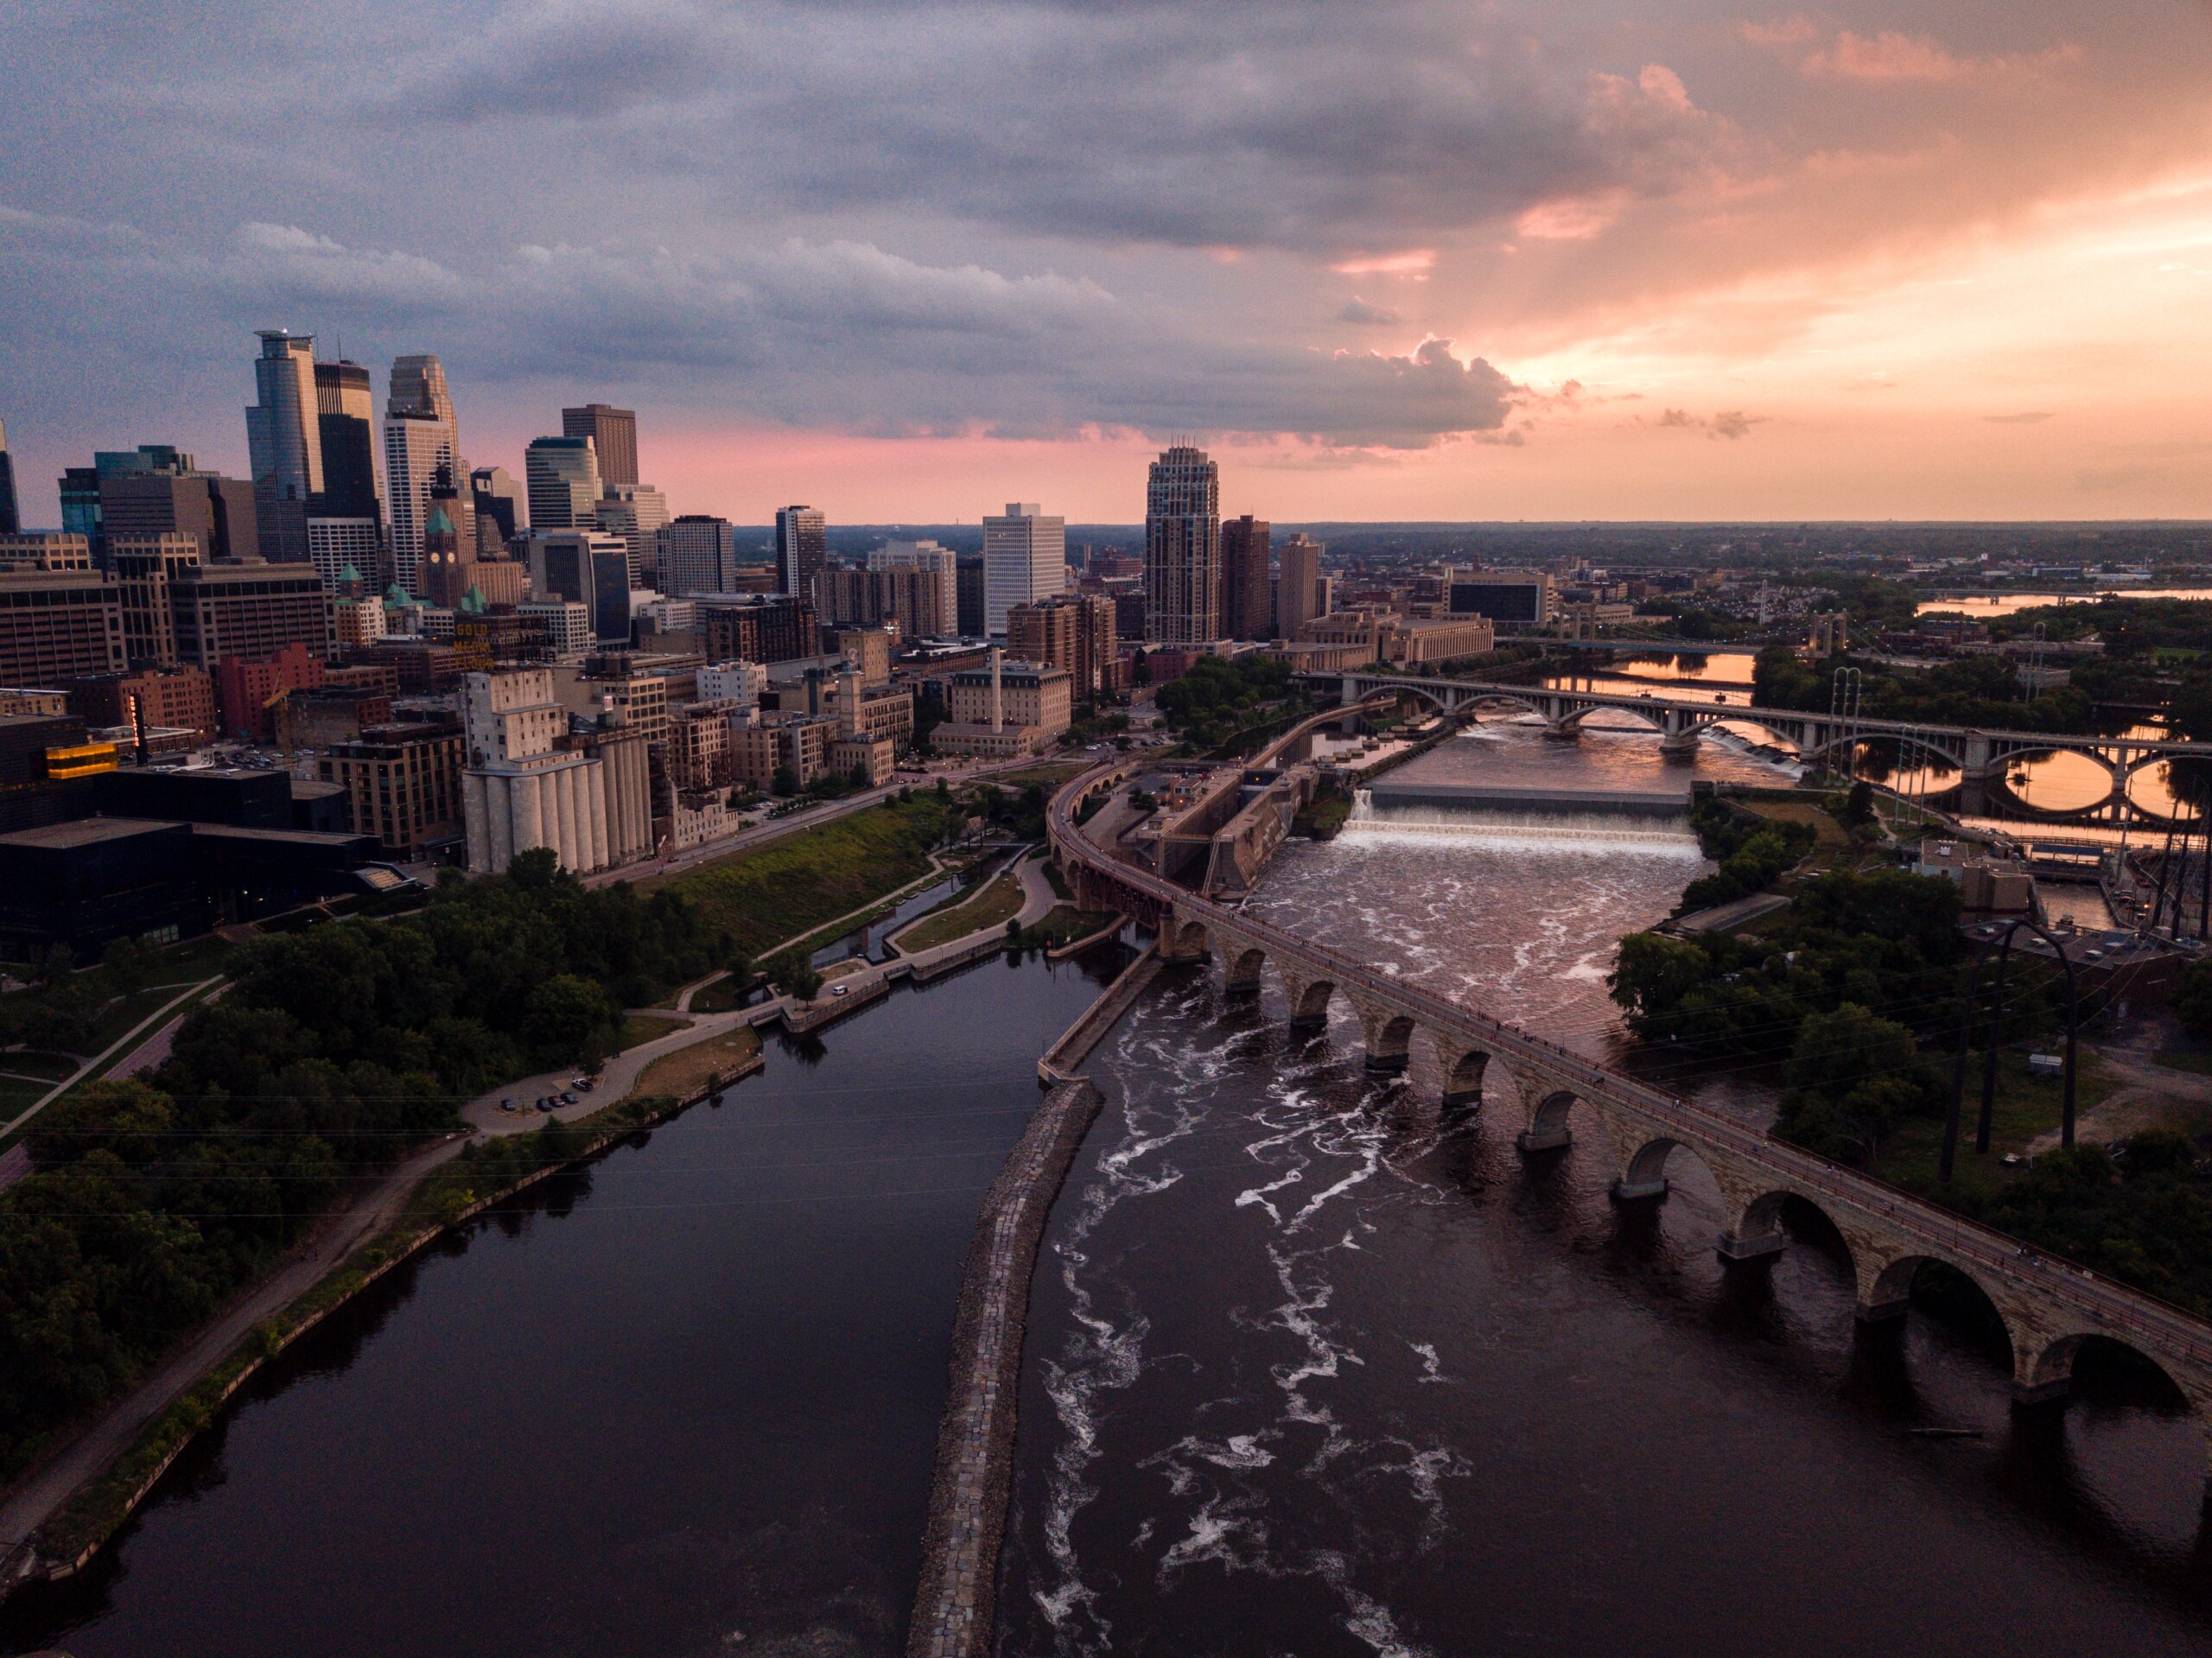 Aerial view of downtown Minneapolis from the East at sunset showing the Mississippi River